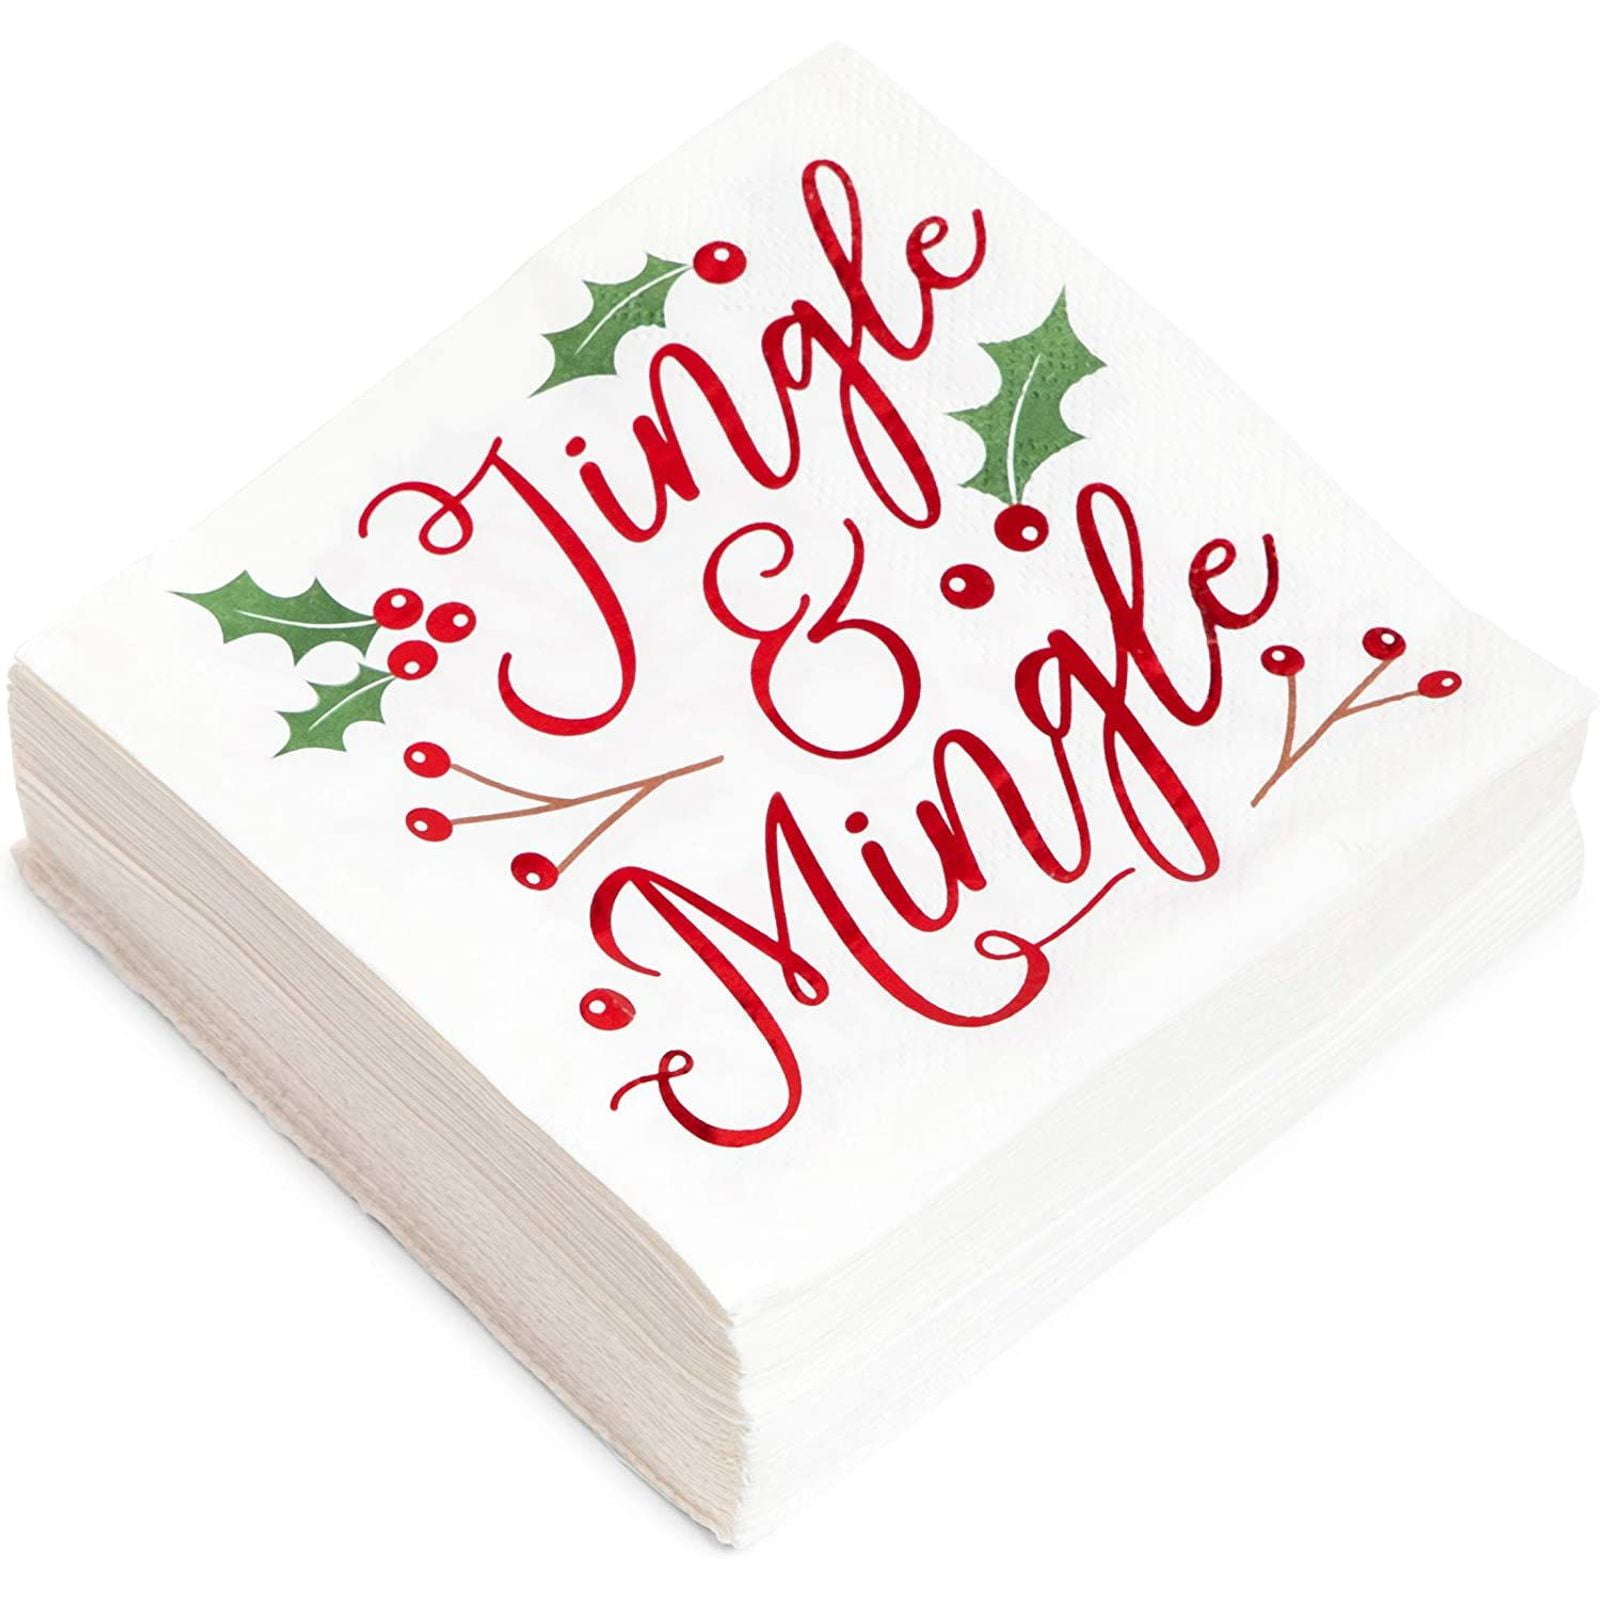 Jingle & Mingle Christmas Party Banner Office Christmas Party Decorations Gold Glitter